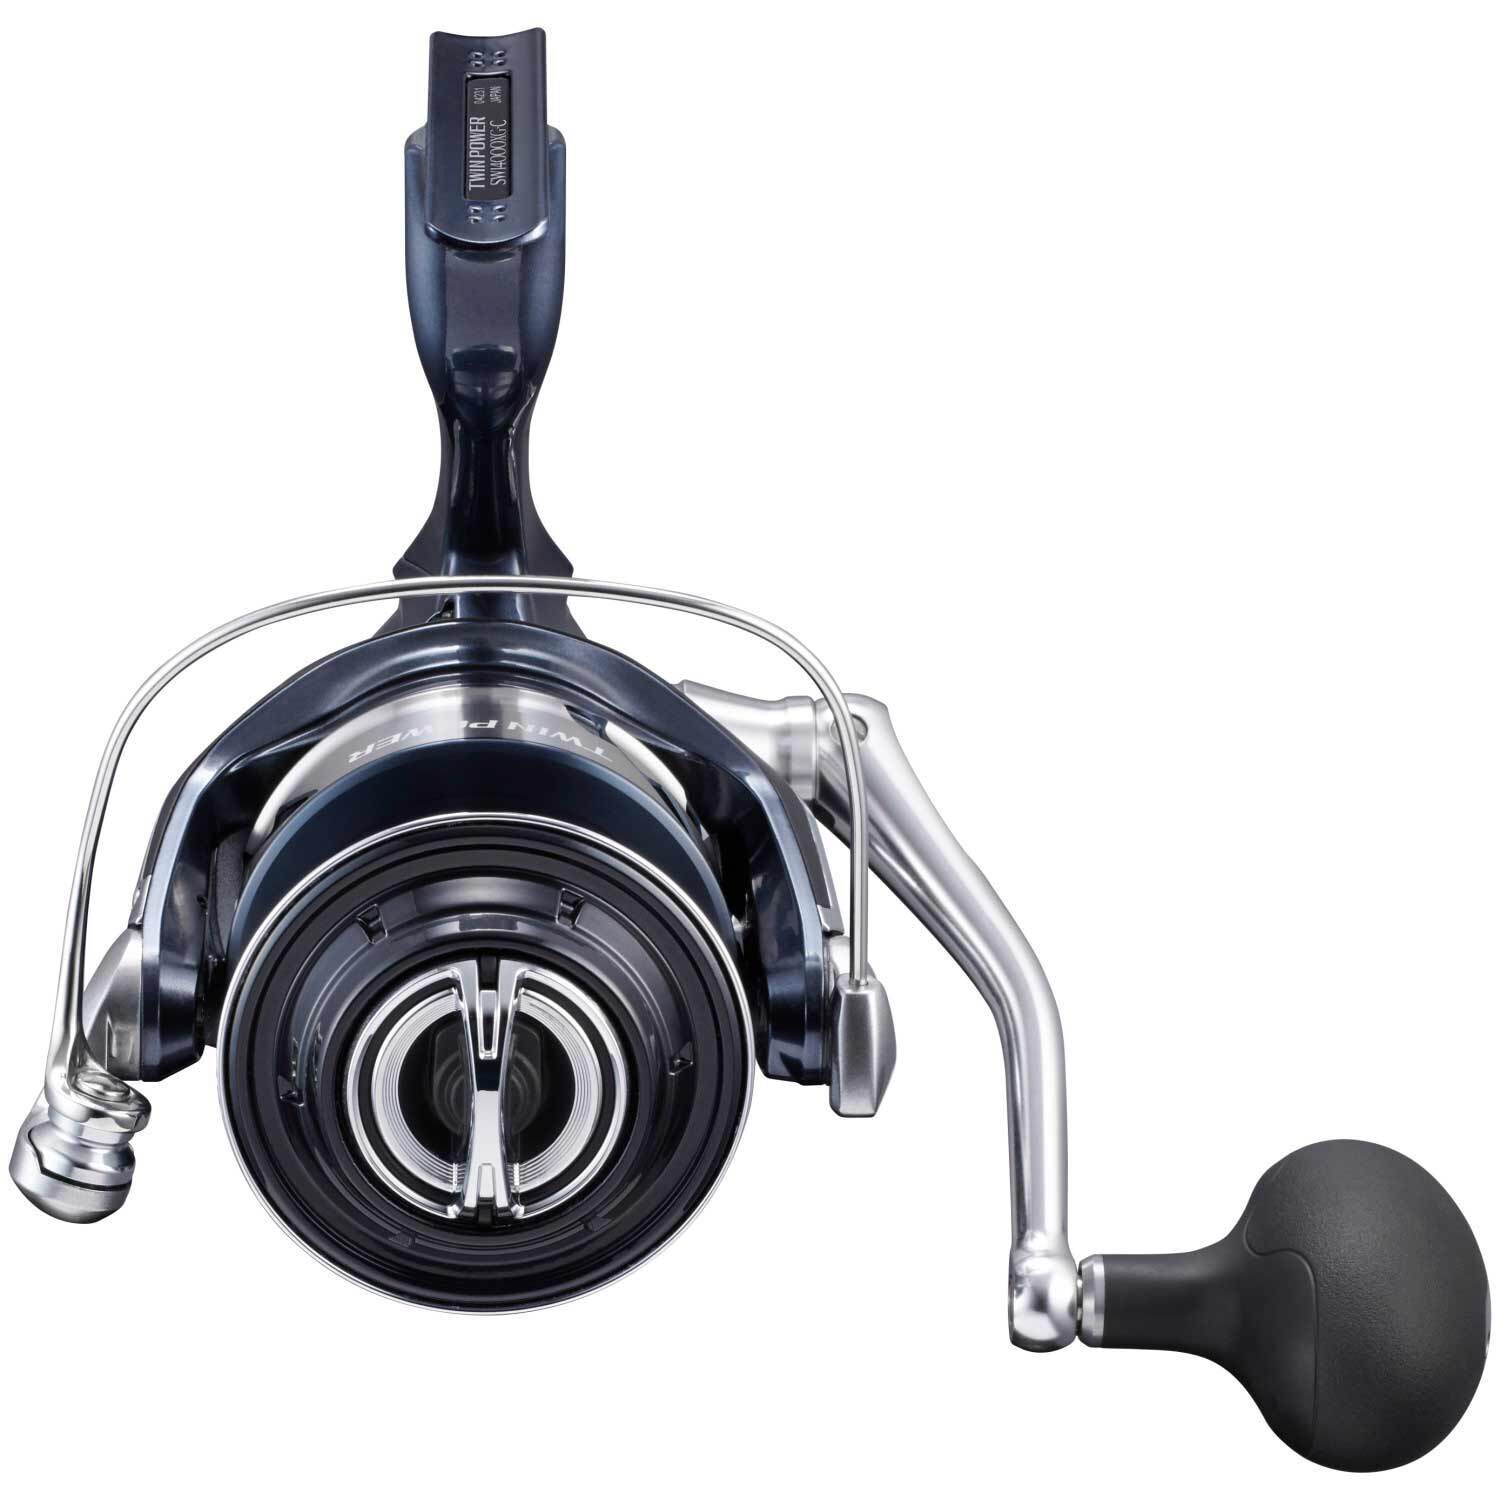 SHIMANO 09 Twin Power SW5000HG Spinning reel Used with Box From Japan F/S